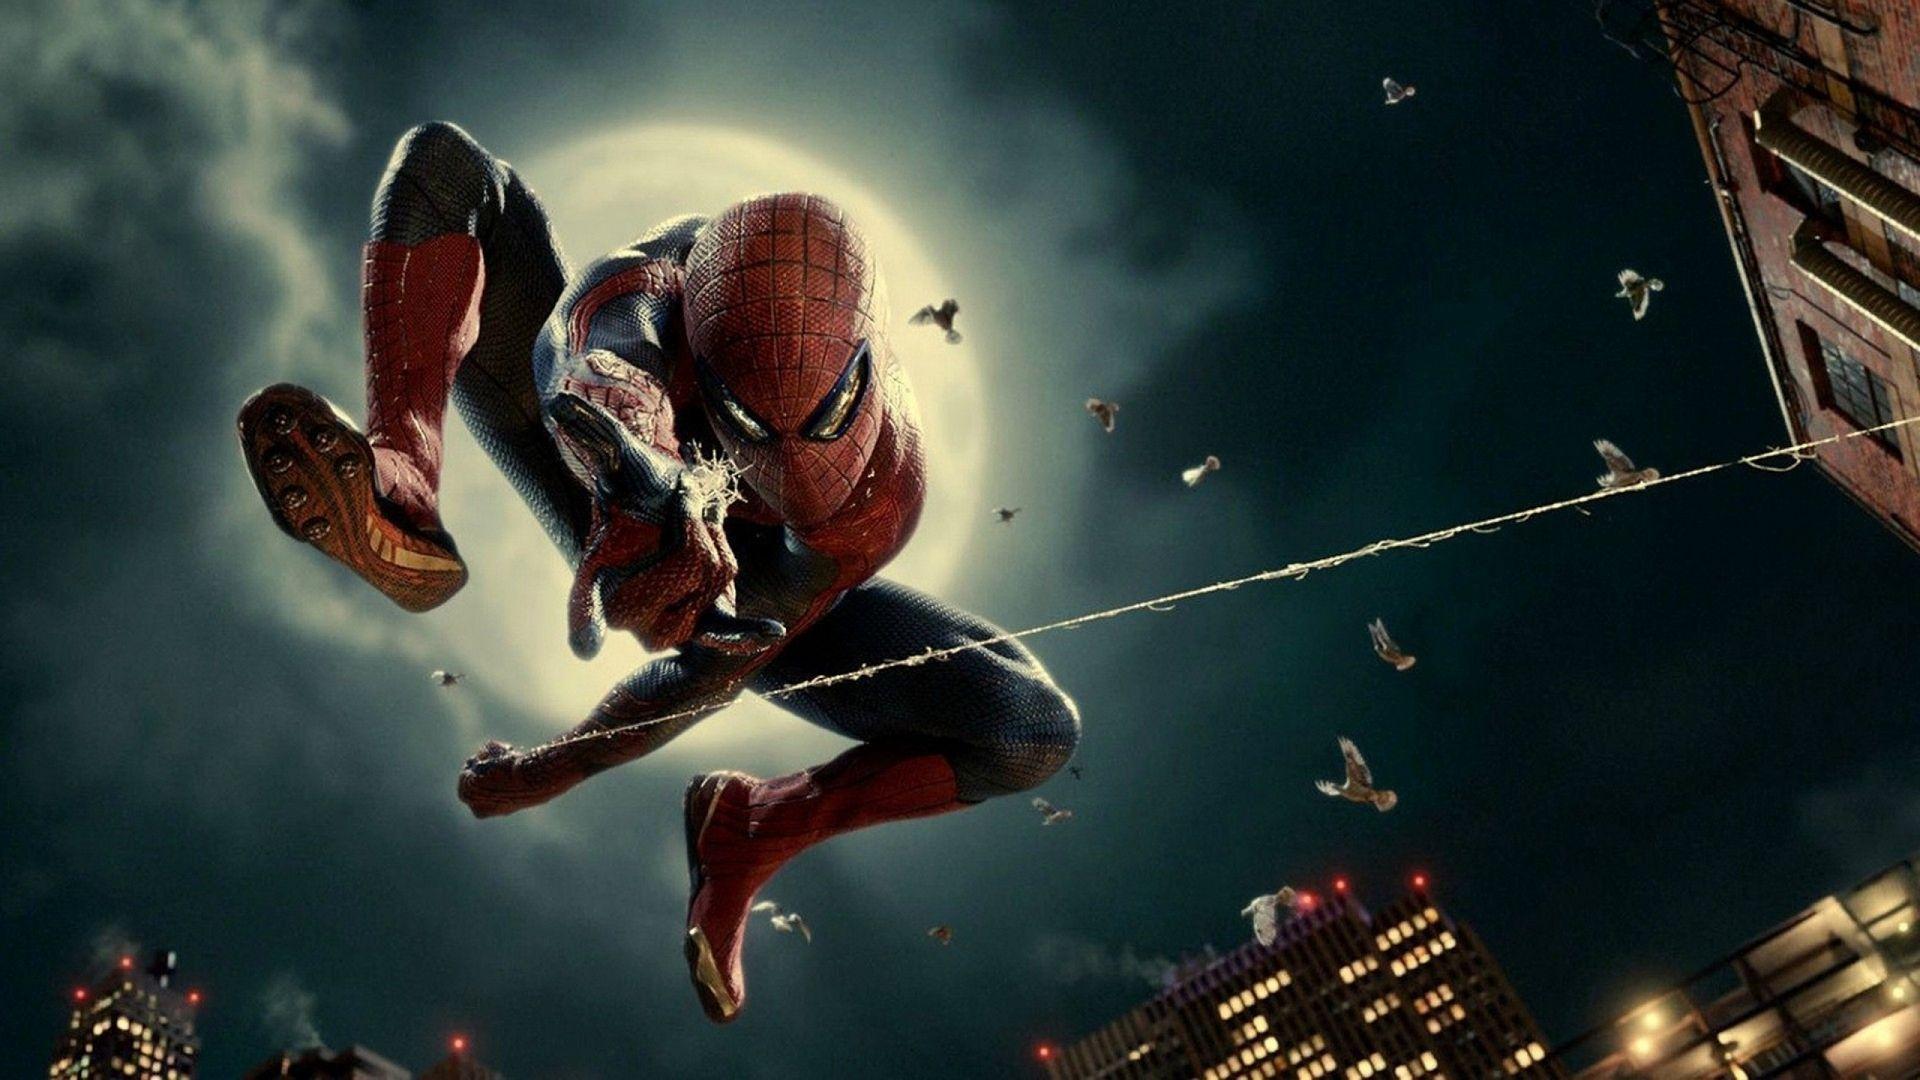 Download Wallpapers 1920x1080 The amazing spider